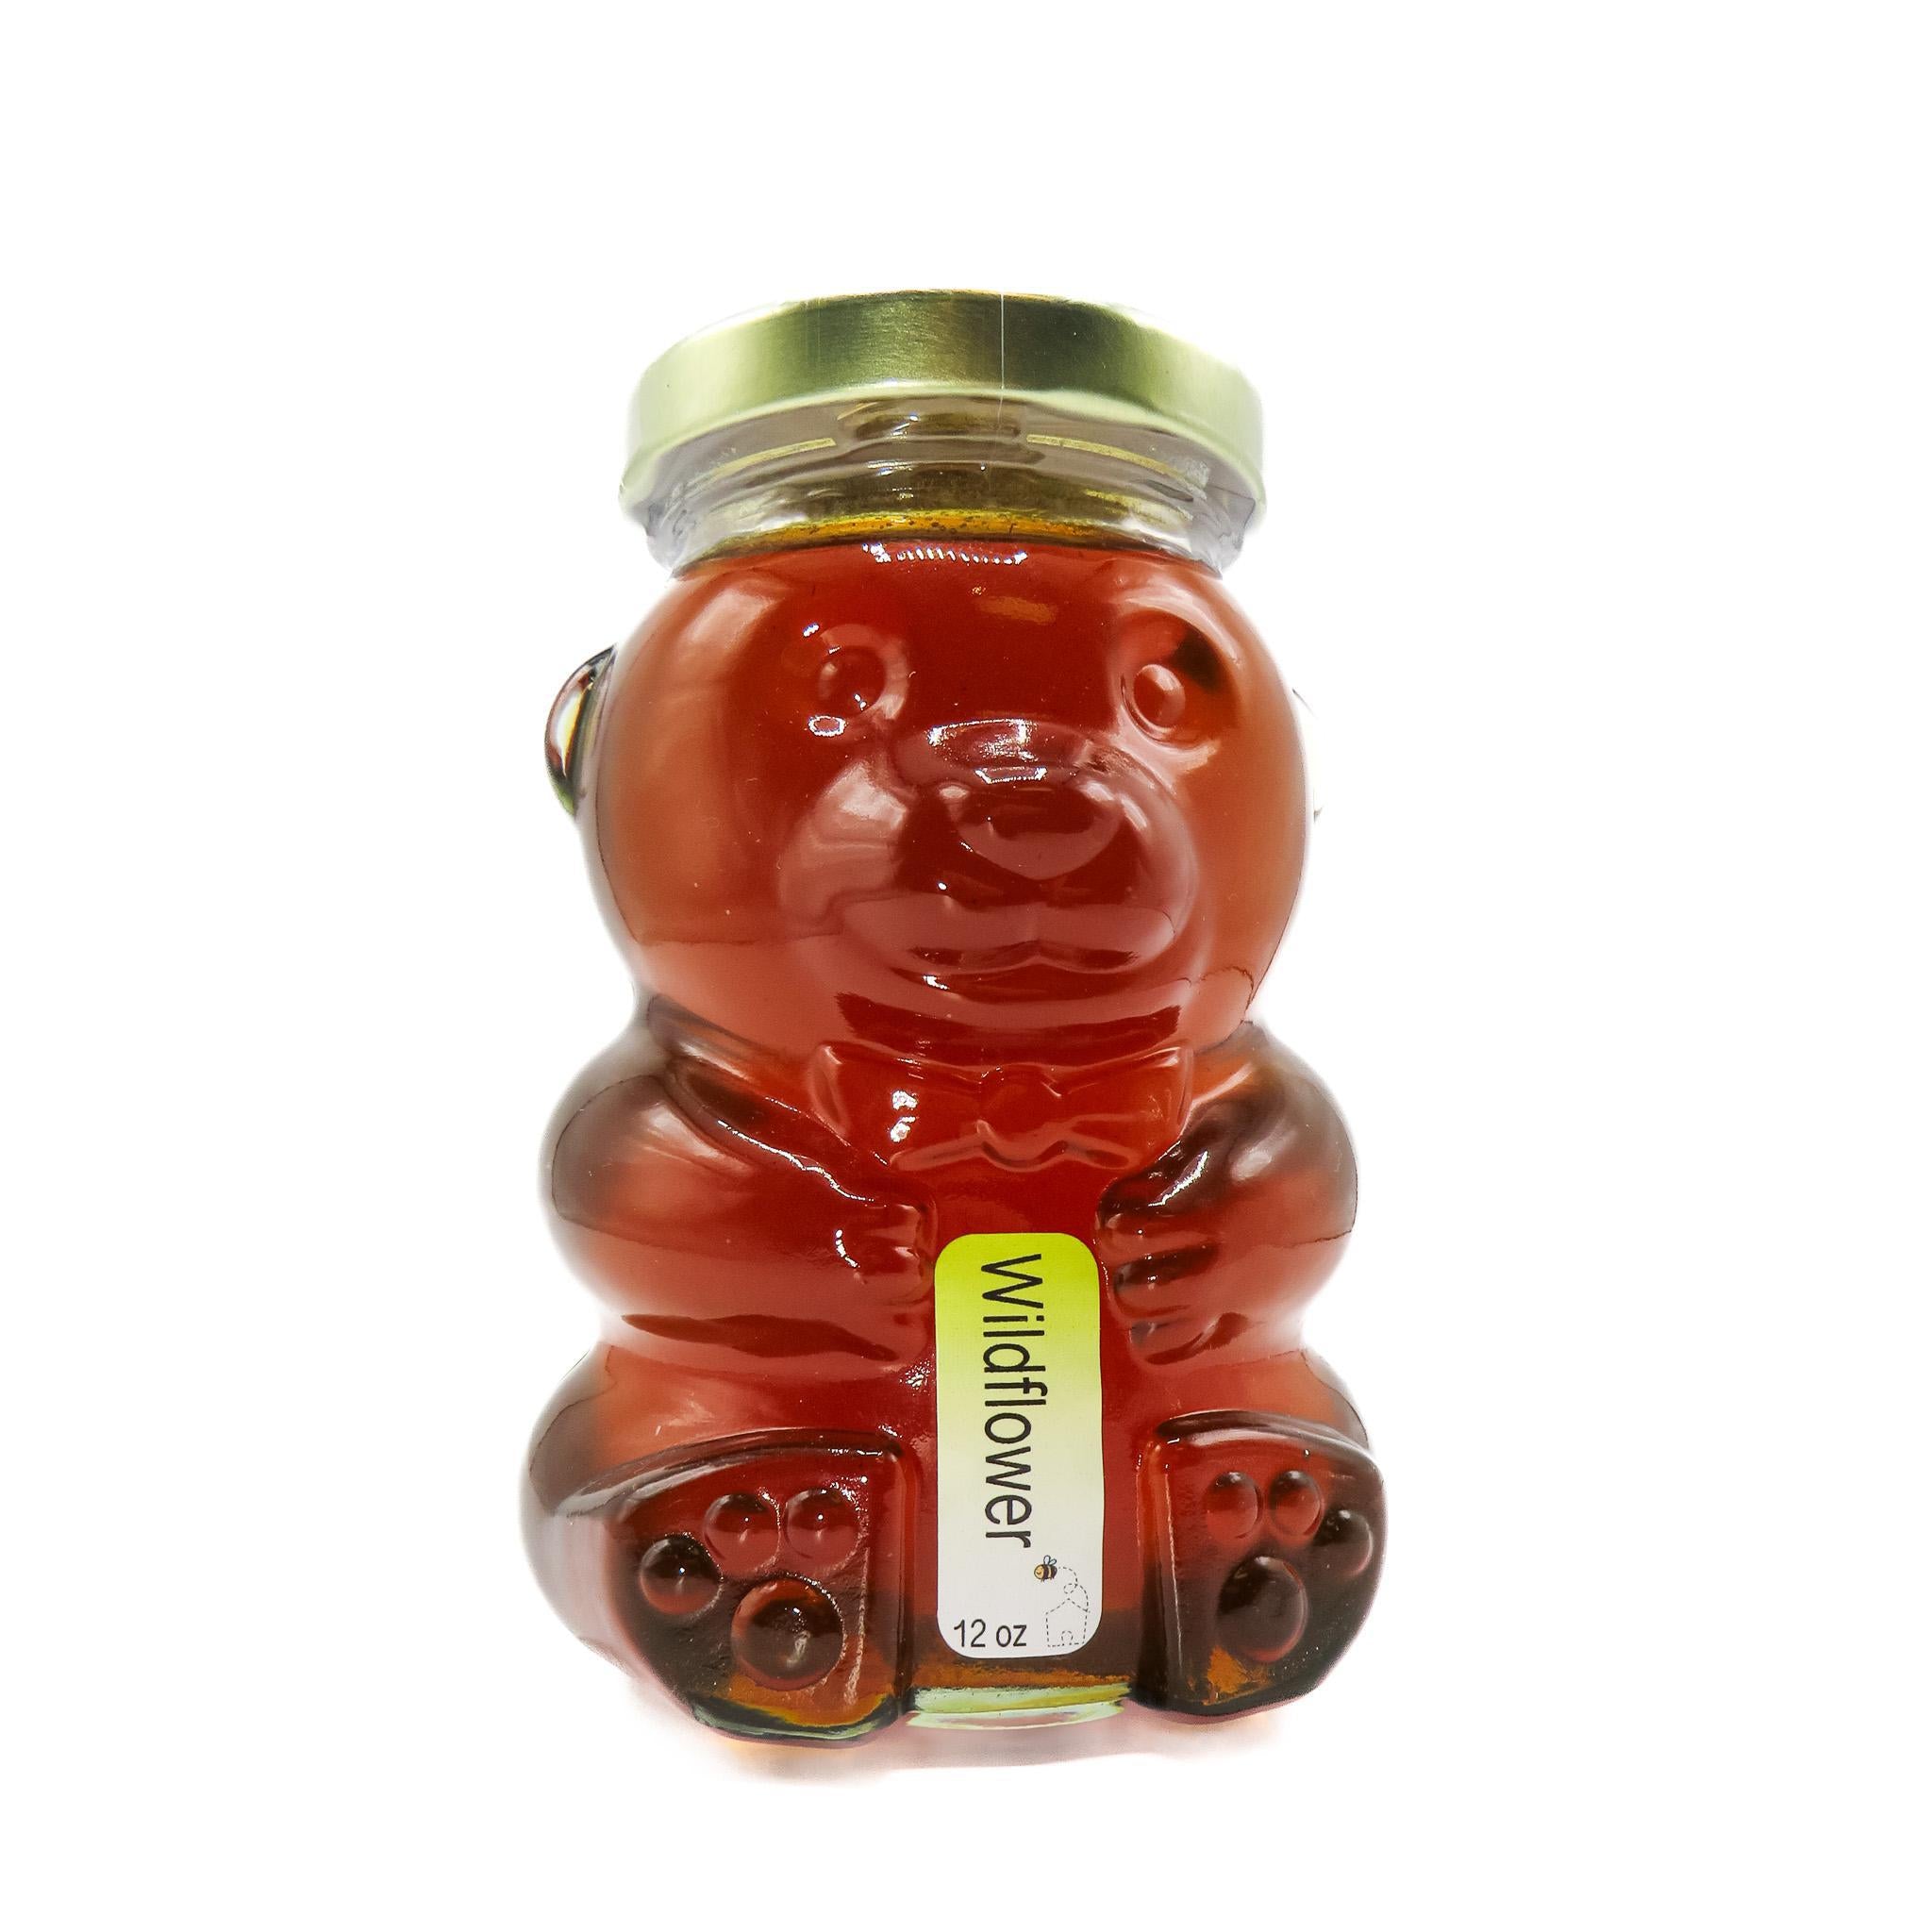 glass bear-shaped bottle contains 12oz of honey sourced from wildflowers